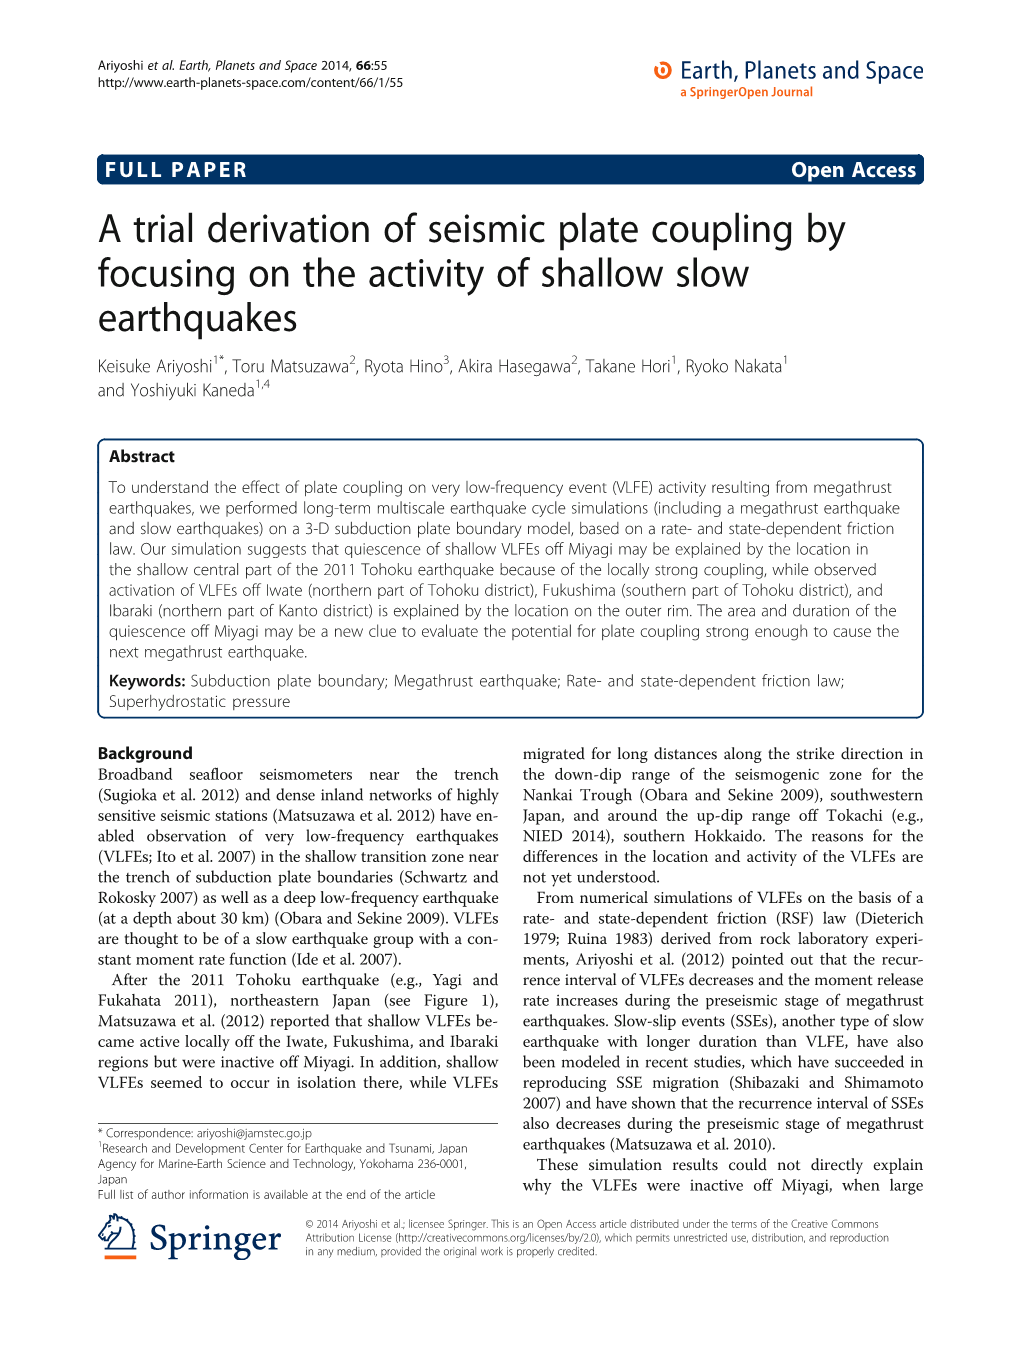 A Trial Derivation of Seismic Plate Coupling by Focusing on the Activity